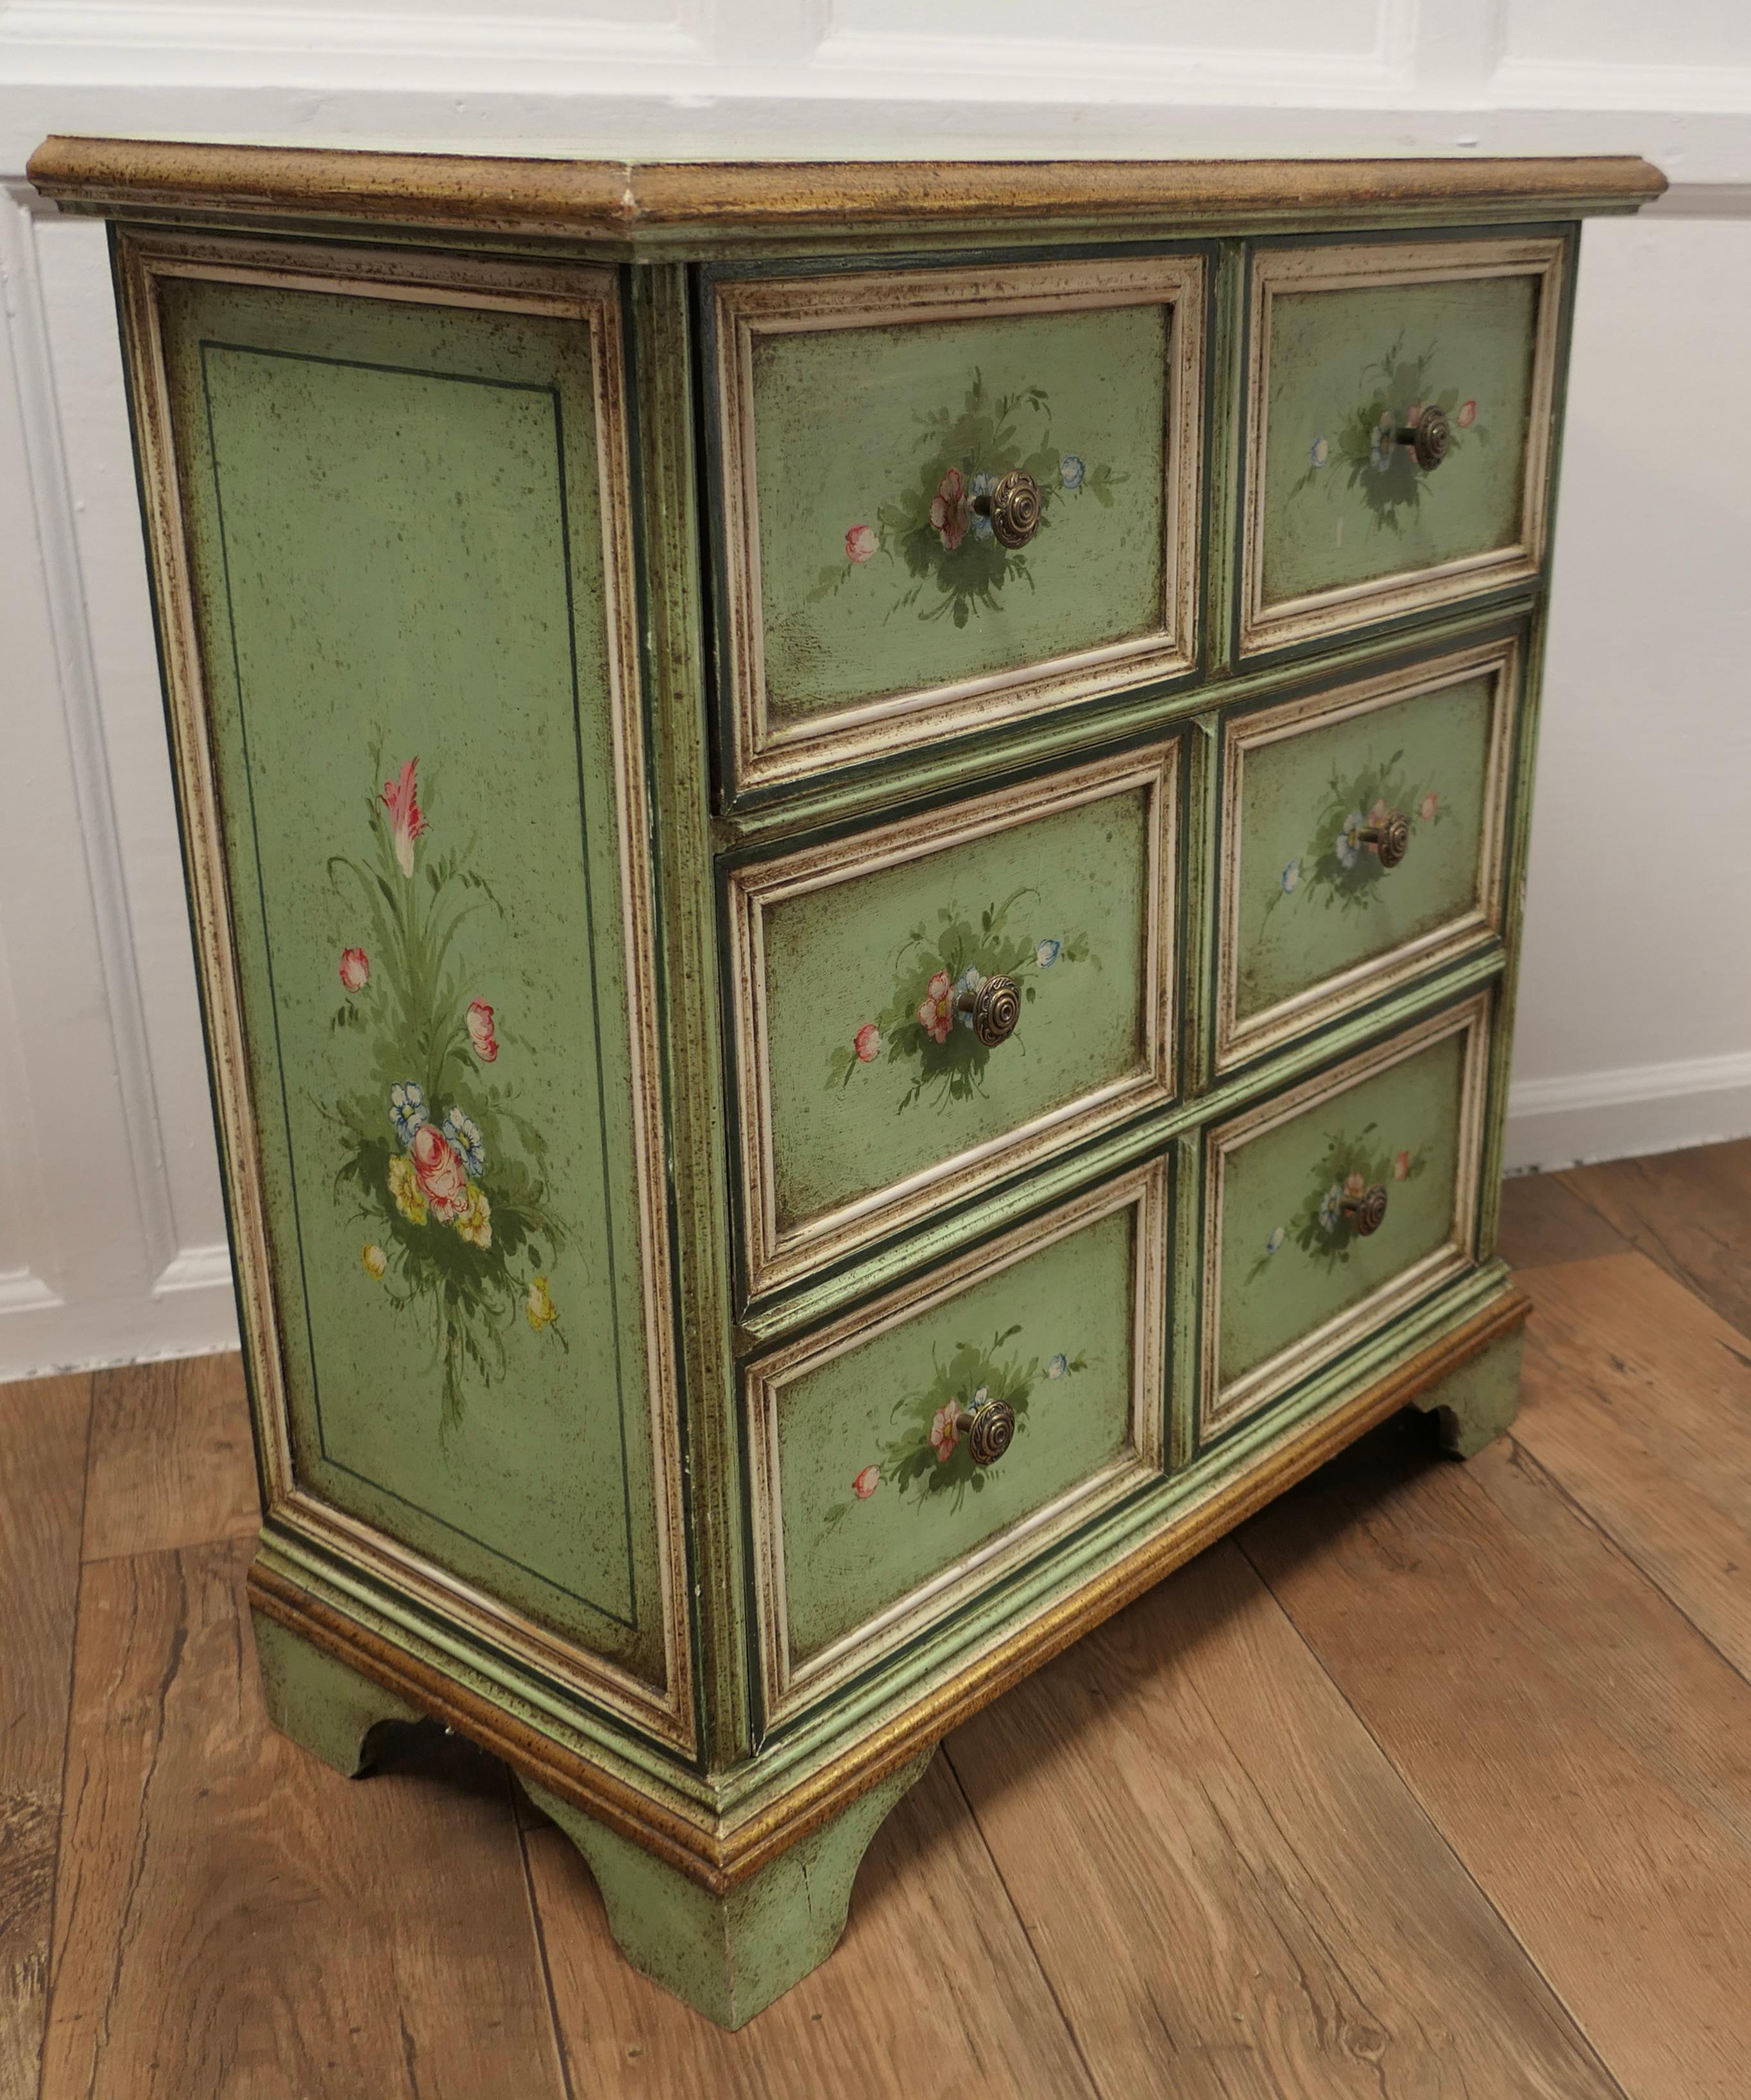 19th Century Original Shabby Painted Chest of Drawers This Delightful 3 Drawer Chest For Sale